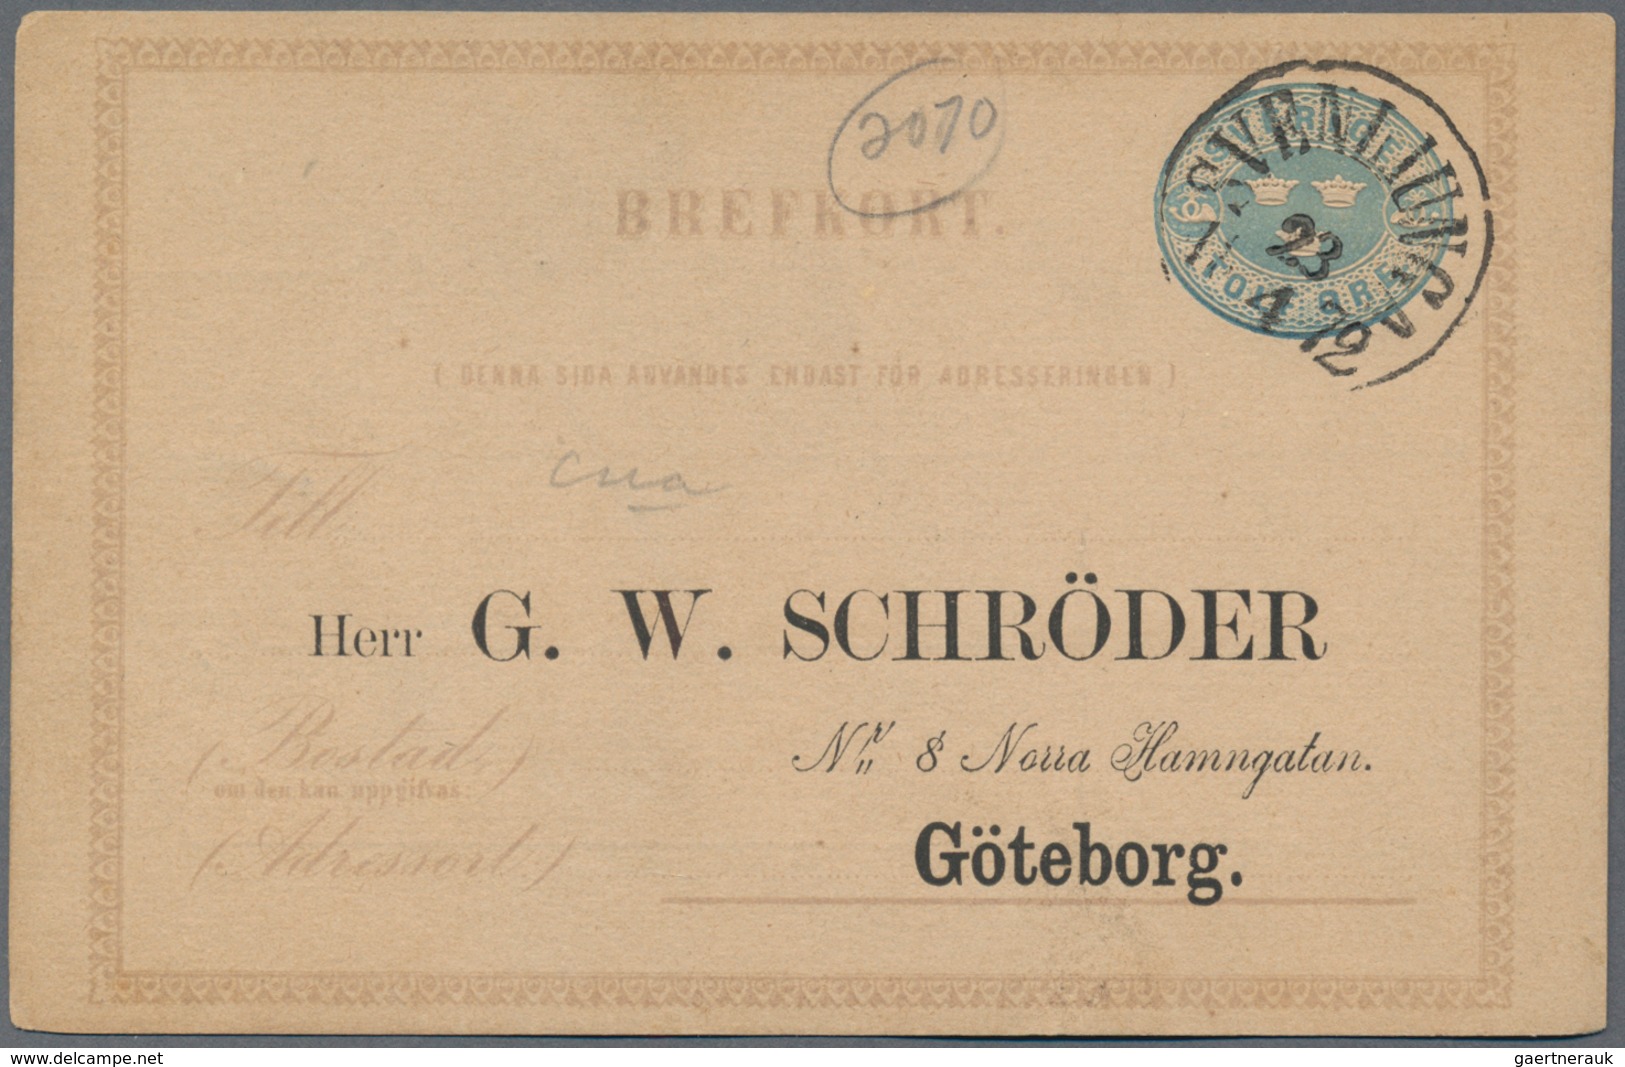 Schweden: 1854/1986 (ca.), approx. 280 covers, cards, picture postacards and unused, CTO-used and us